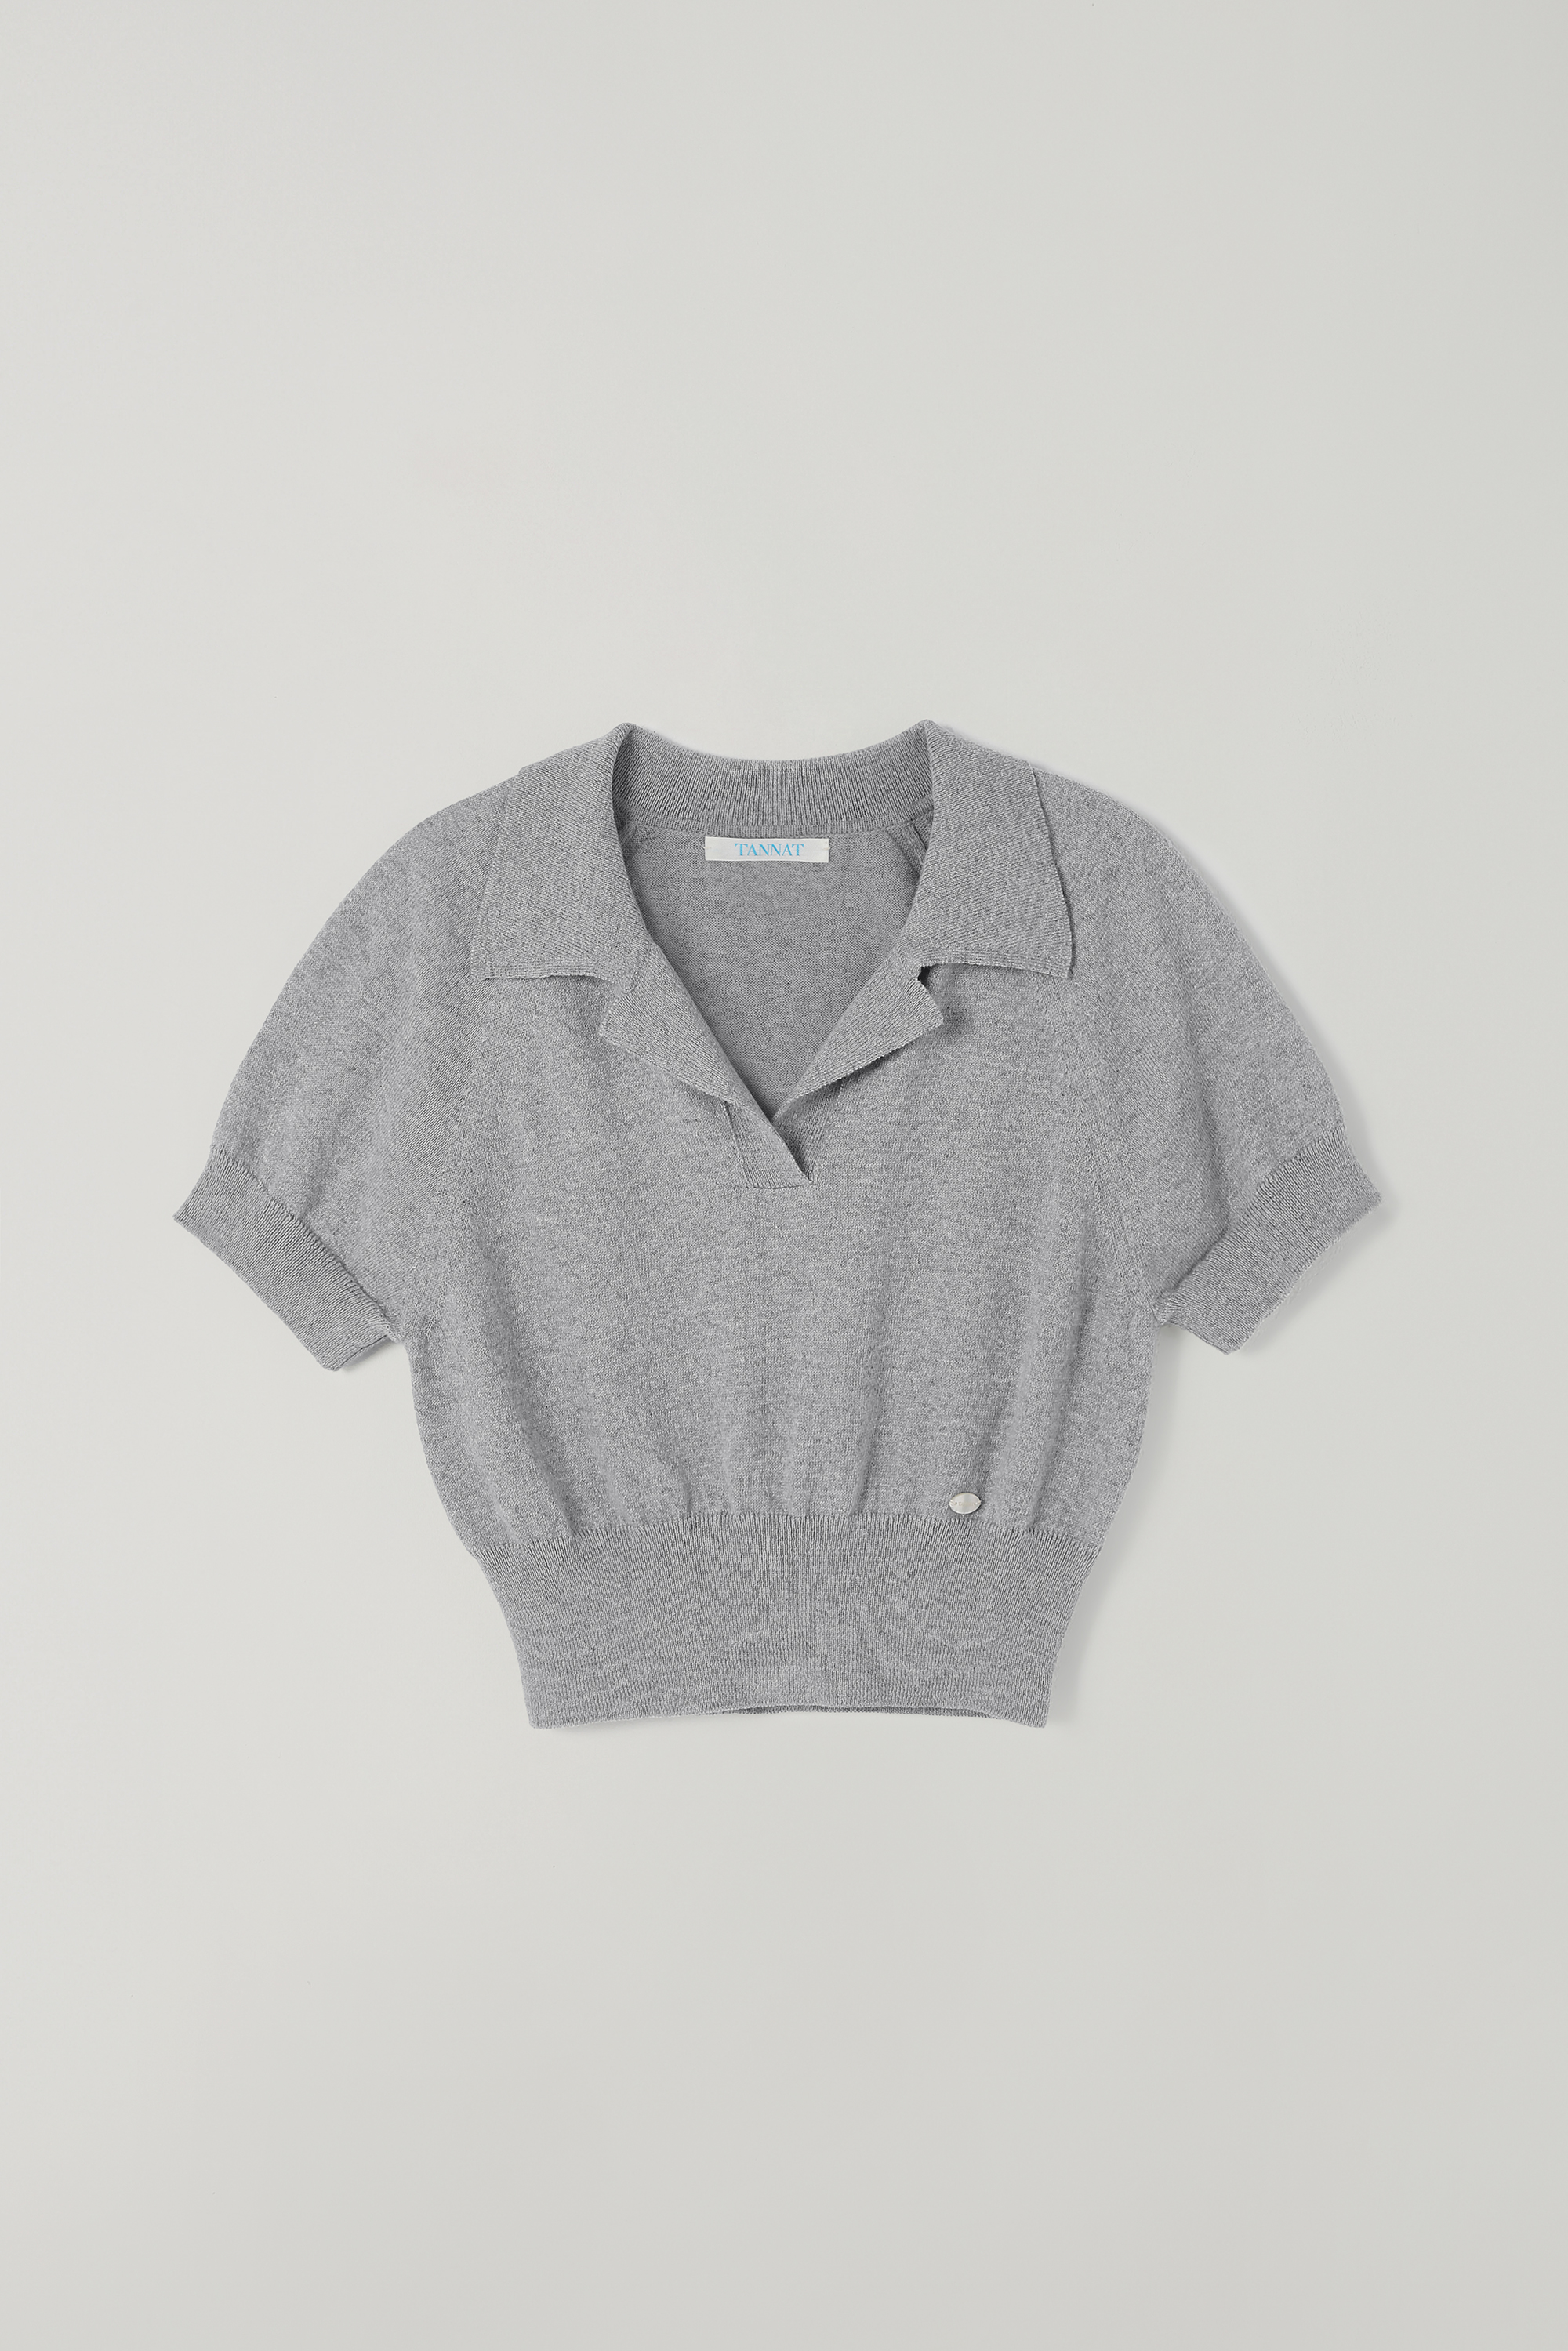 (8th re-stock) T/T Crop collar knit top (gray)